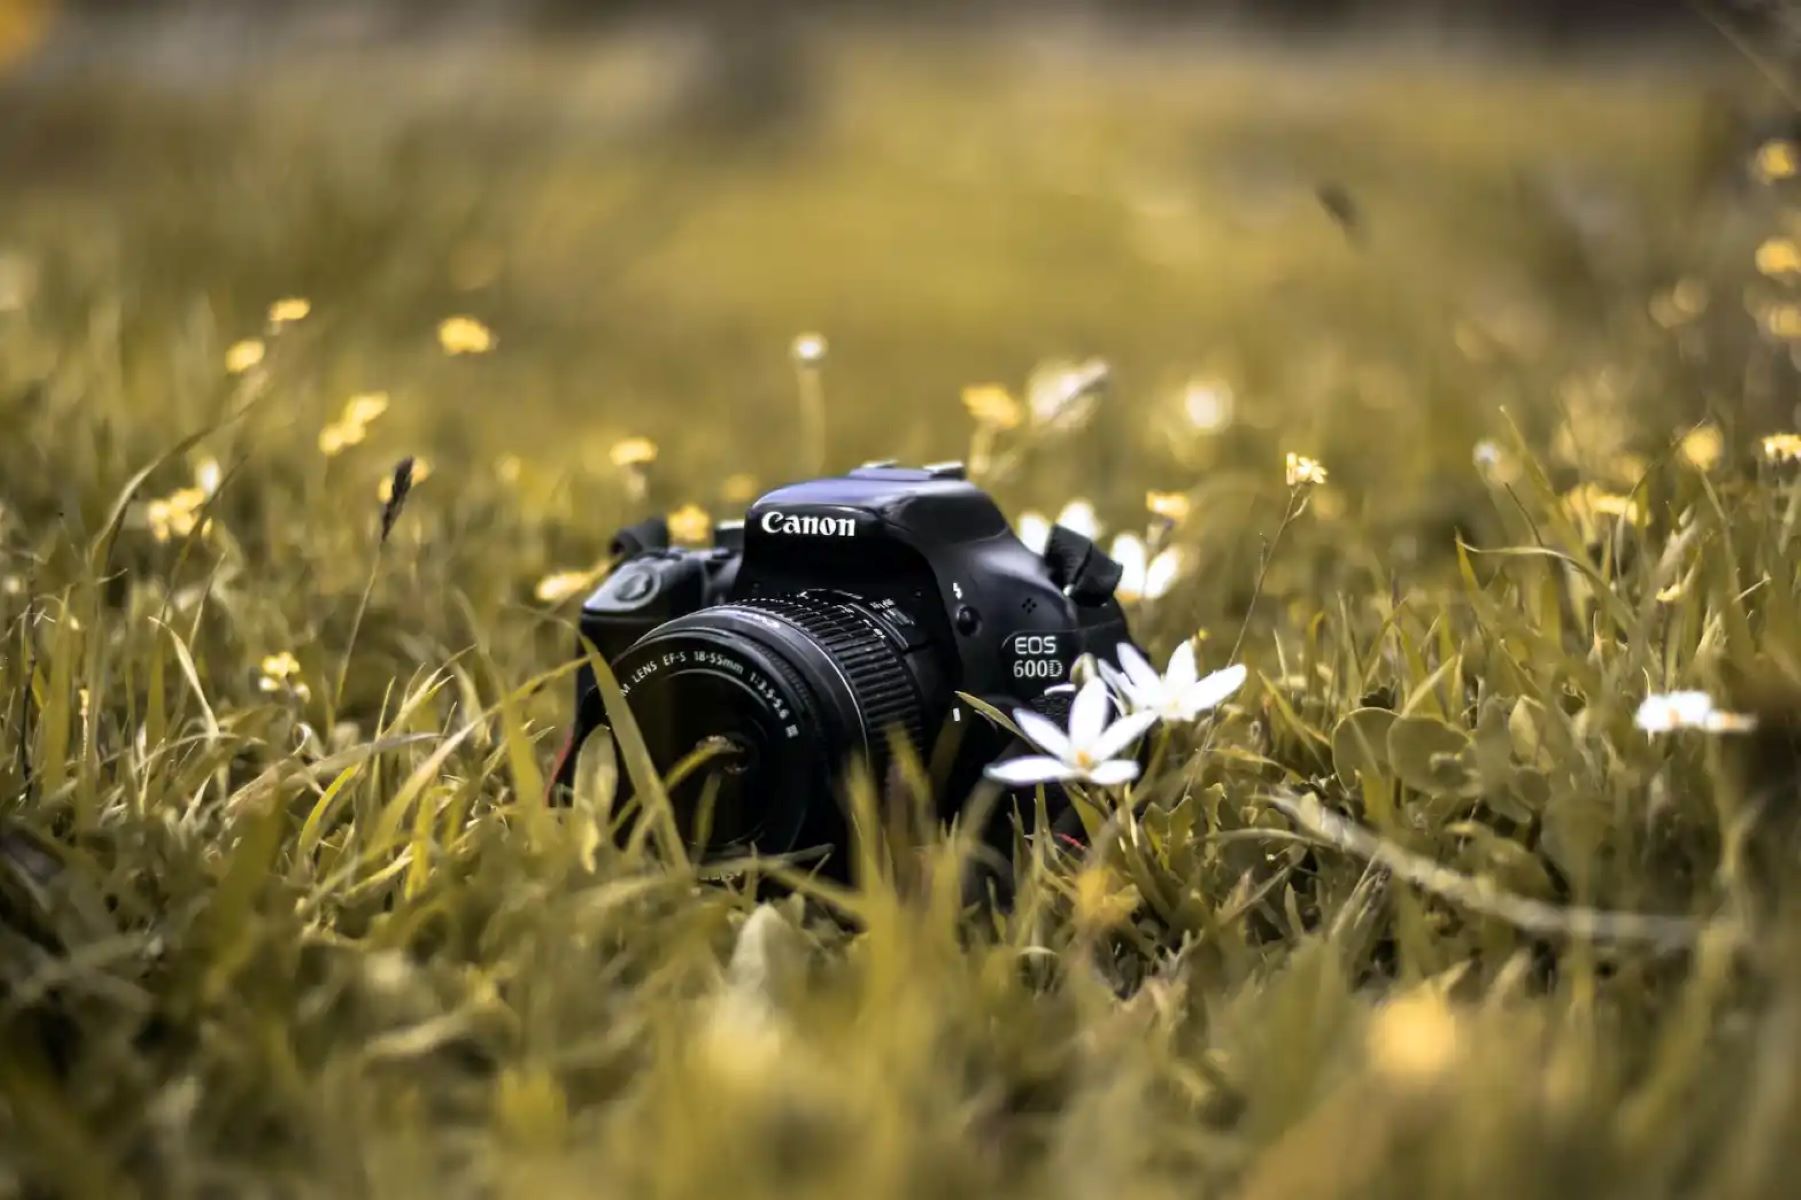 How To Use The Canon DSLR Camera